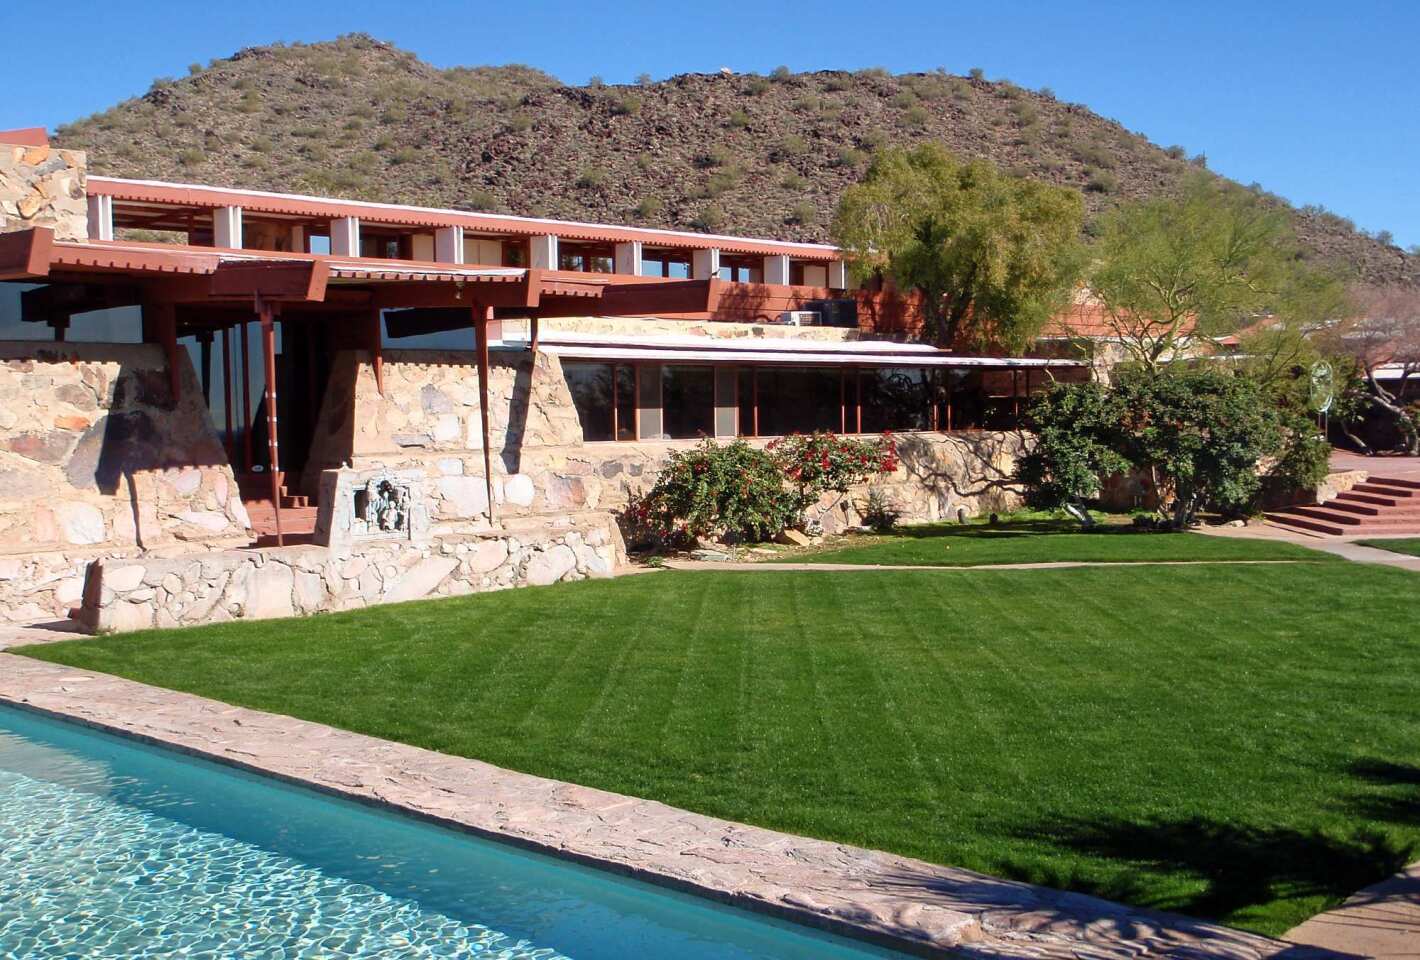 During high season (November-April), the two-hour tour of Frank Lloyd Wright's winter home and studio is a hefty $32. Offseason, the price drops to $24. 12621 N. Frank Lloyd Wright Blvd., Scottsdale; (480) 627-5340, http://www.franklloydwright.org.